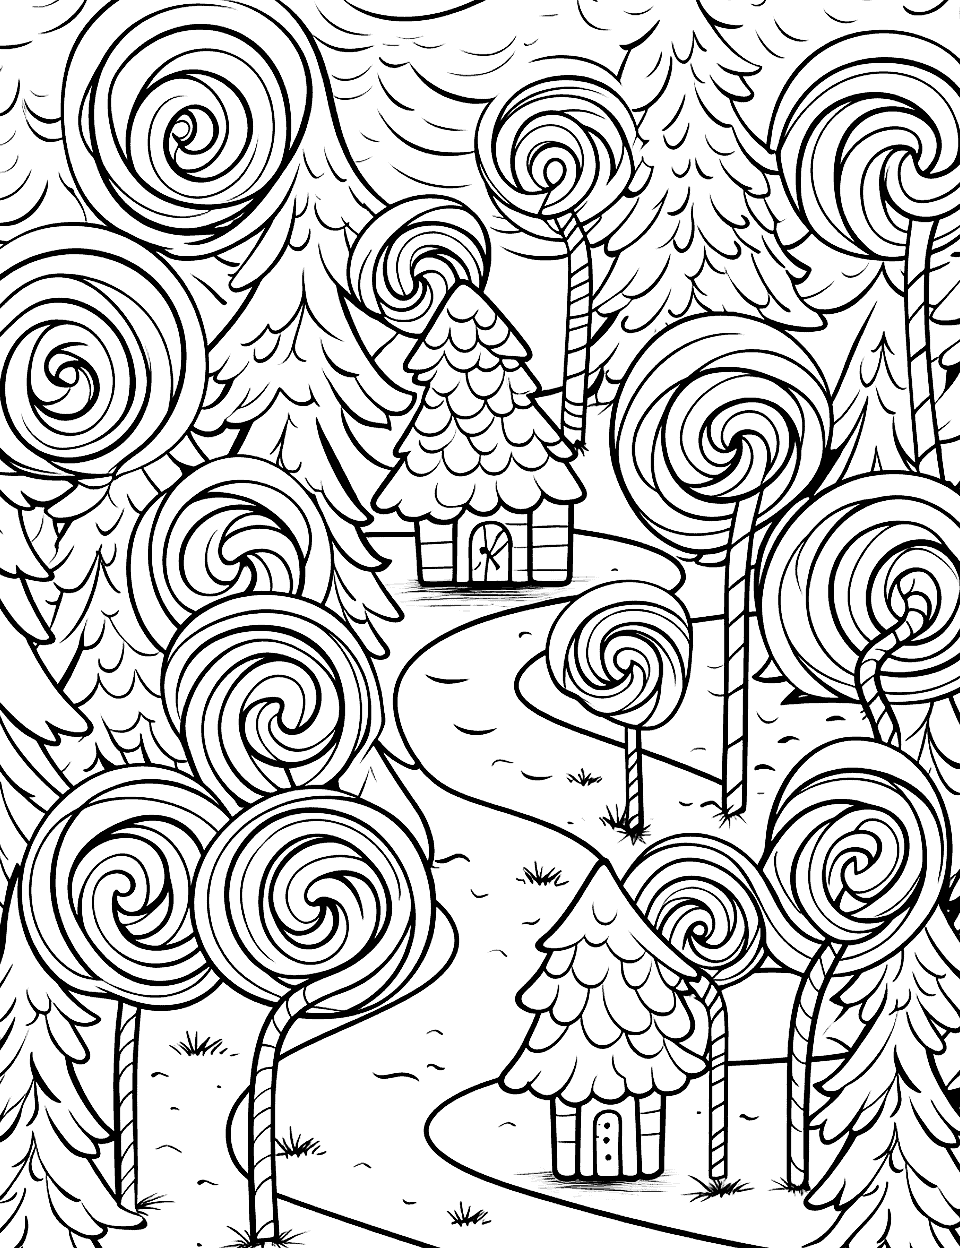 Candy Cane Sweets Forest  Coloring Page - A forest made out of candy canes, frosted trees, and gingerbread huts.